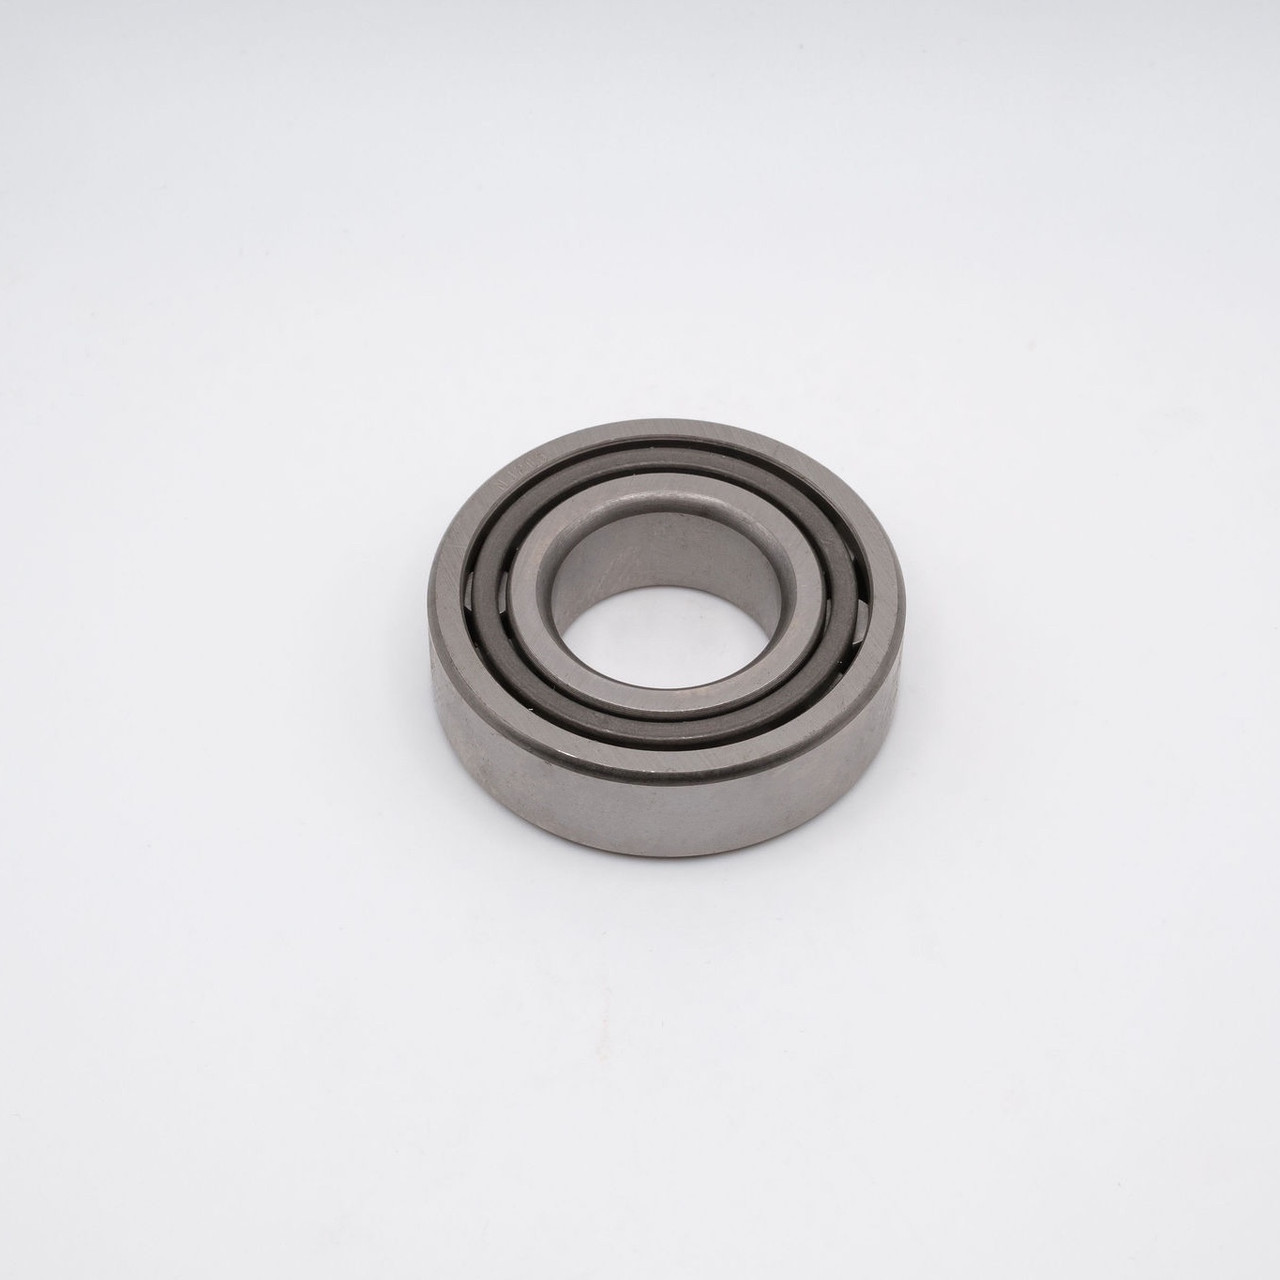 NU204W Cylindrical Roller Bearing Steel Cage 20x47x14mm Top View